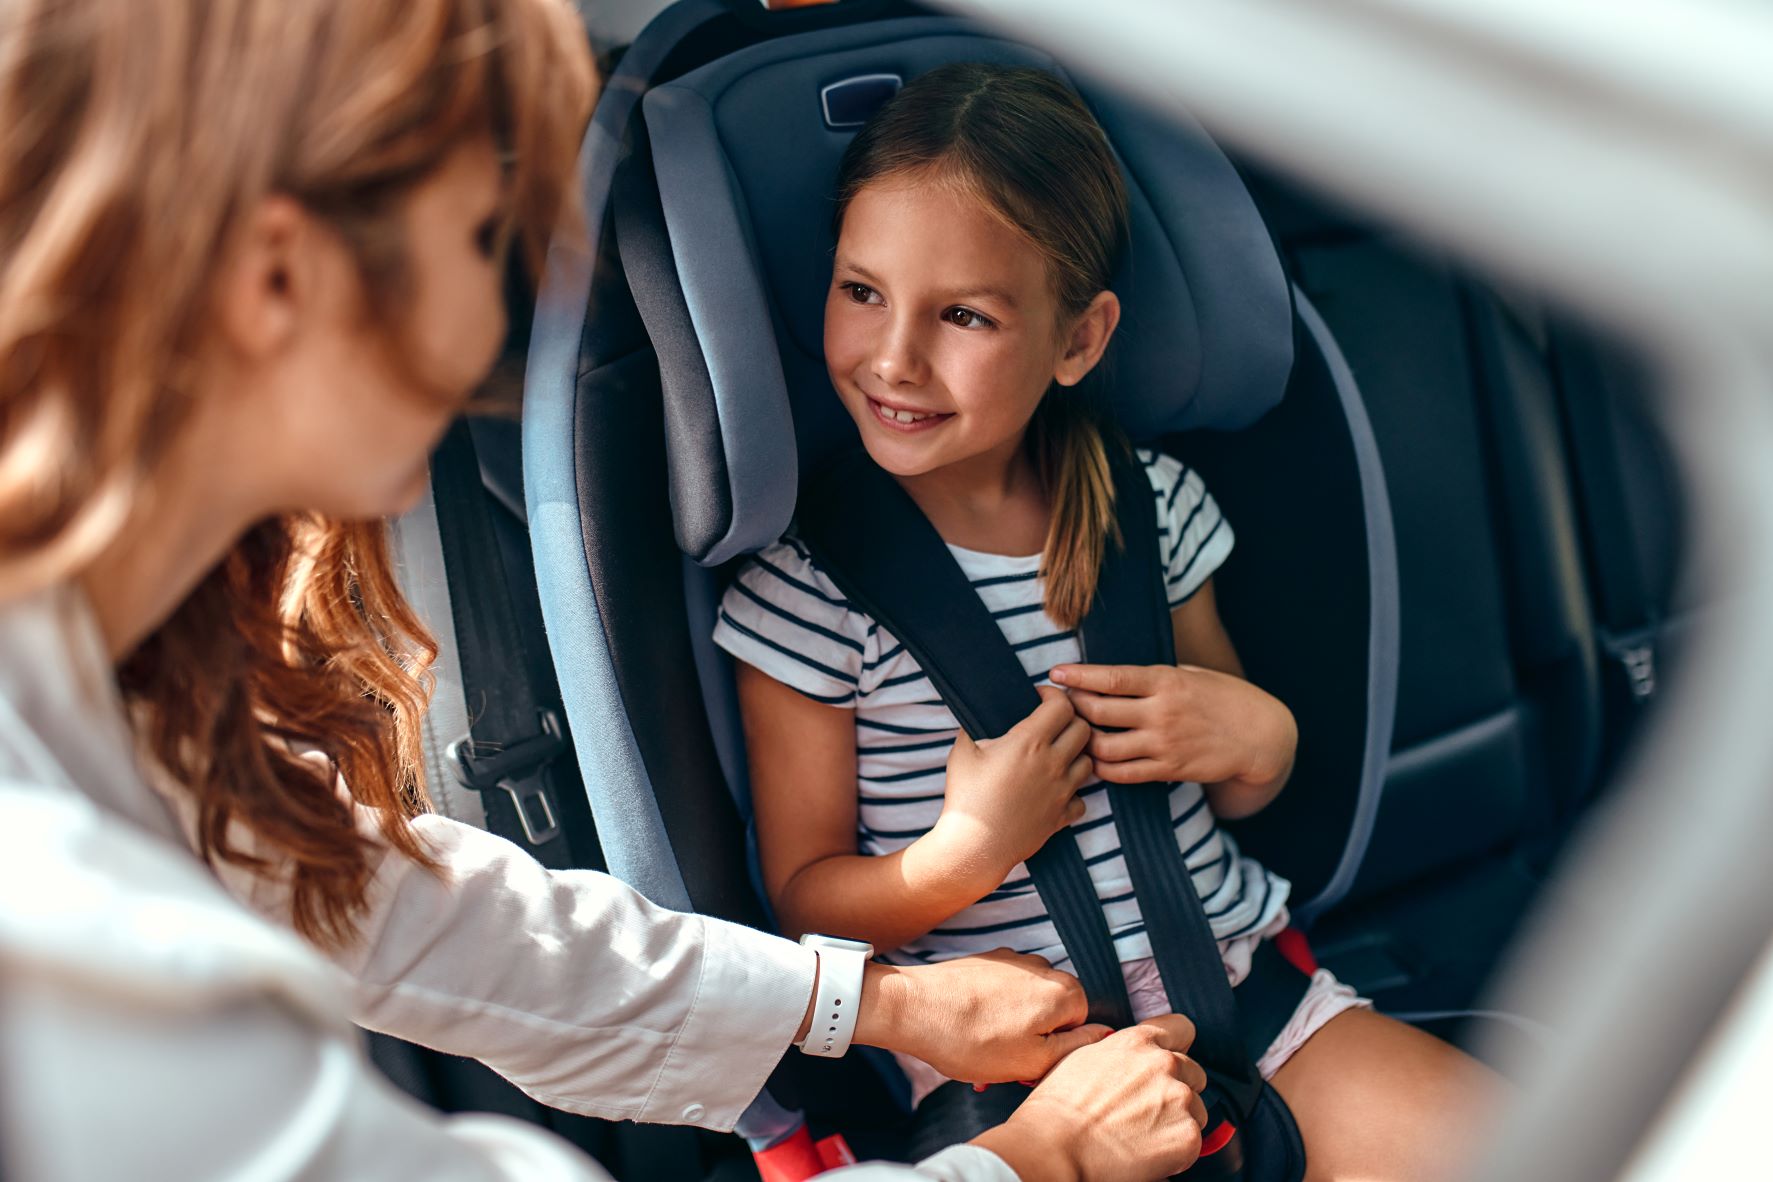 What to Do If You Are in a Car Accident With a Child in the Vehicle - Abogados de Accidentes Costa Mesa